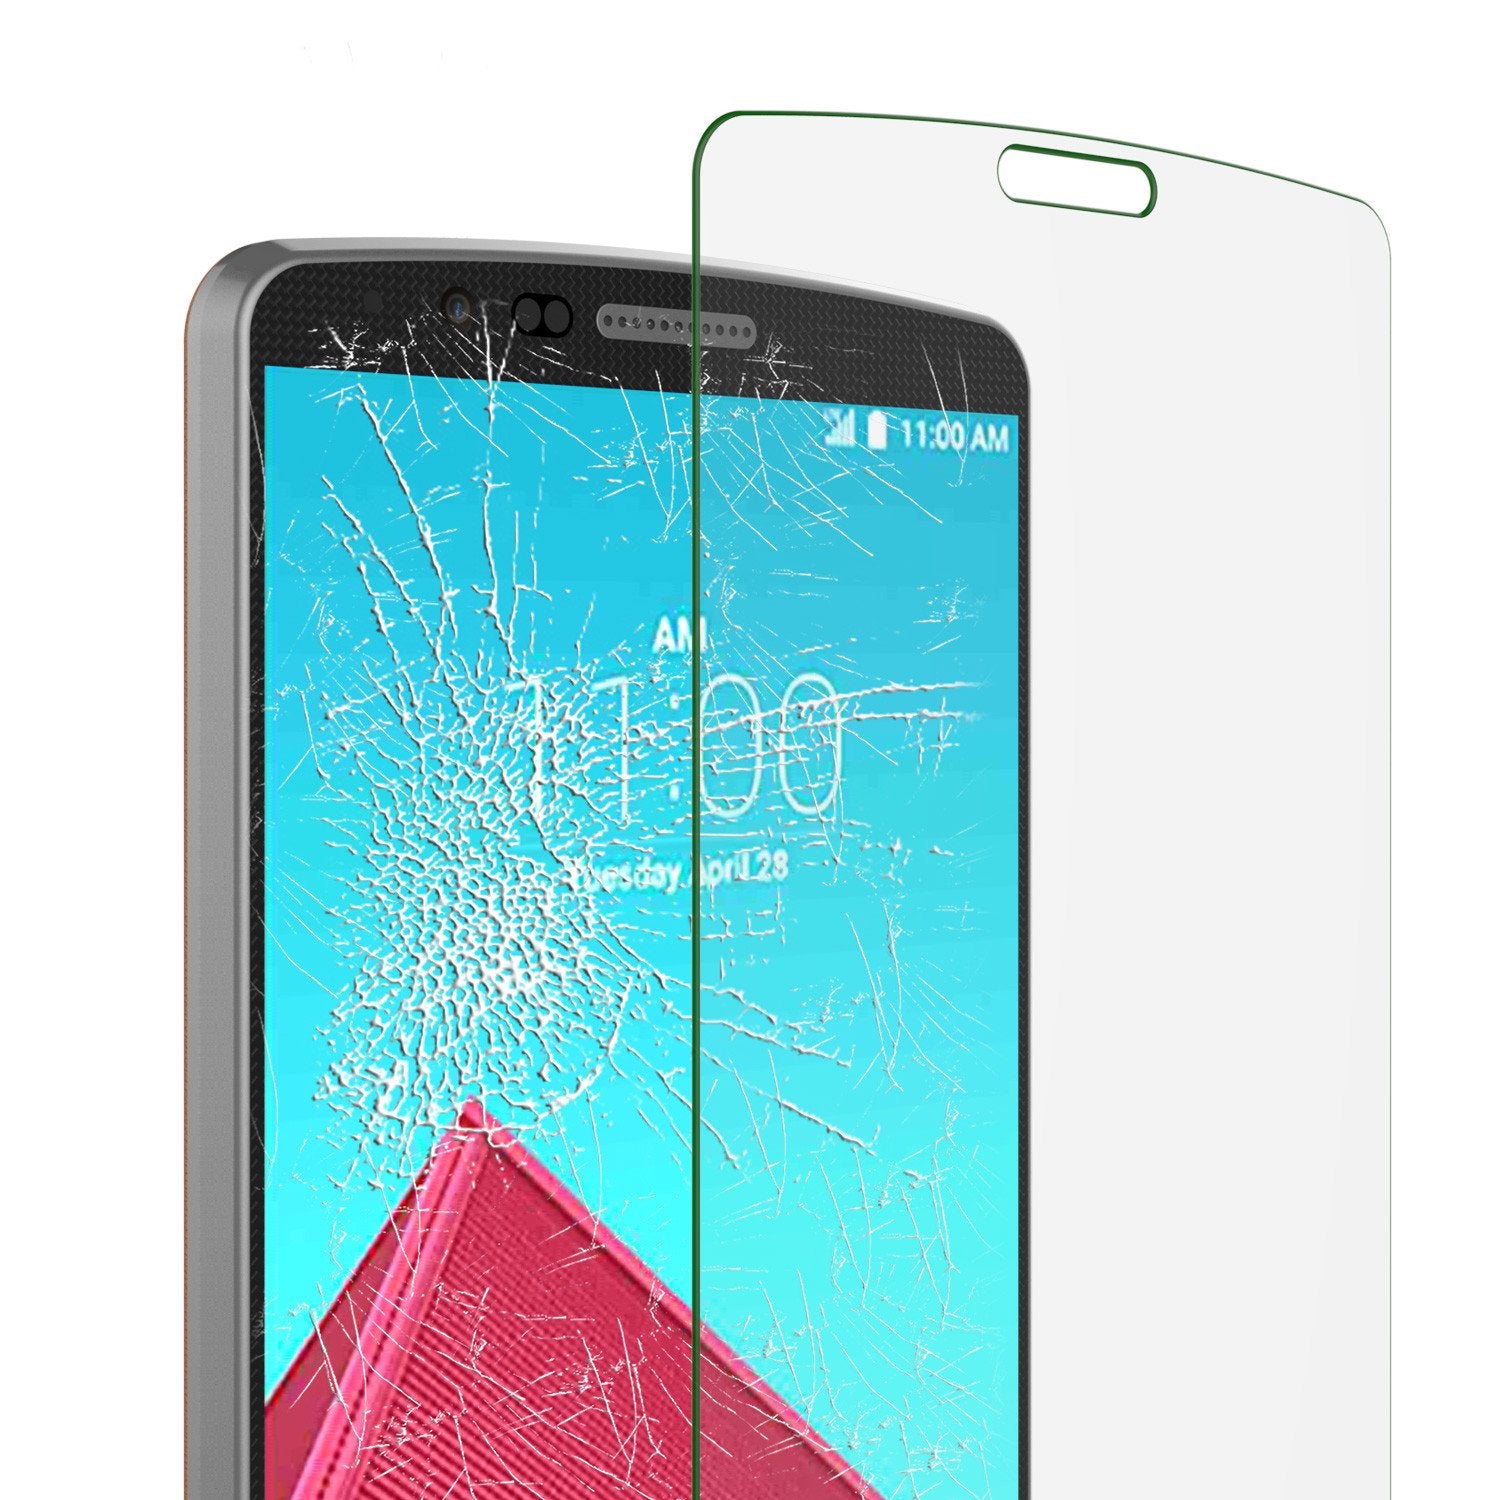 LG G4 Punkcase Glass SHIELD Tempered Glass Screen Protector 0.33mm Thick 9H Glass